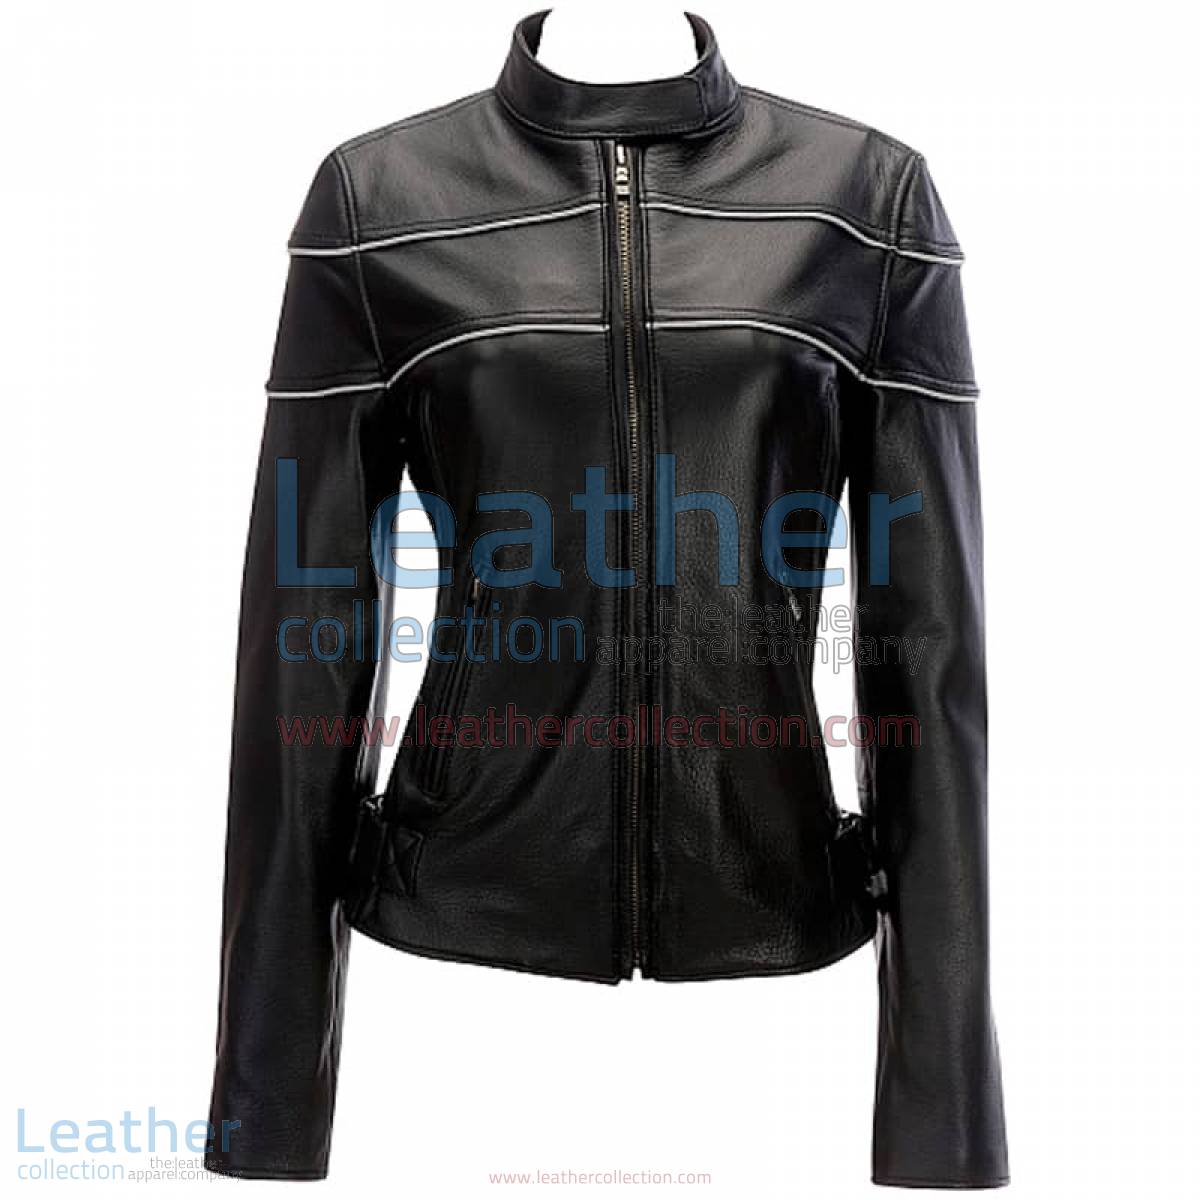 Leather Reflective Piping Jacket Black